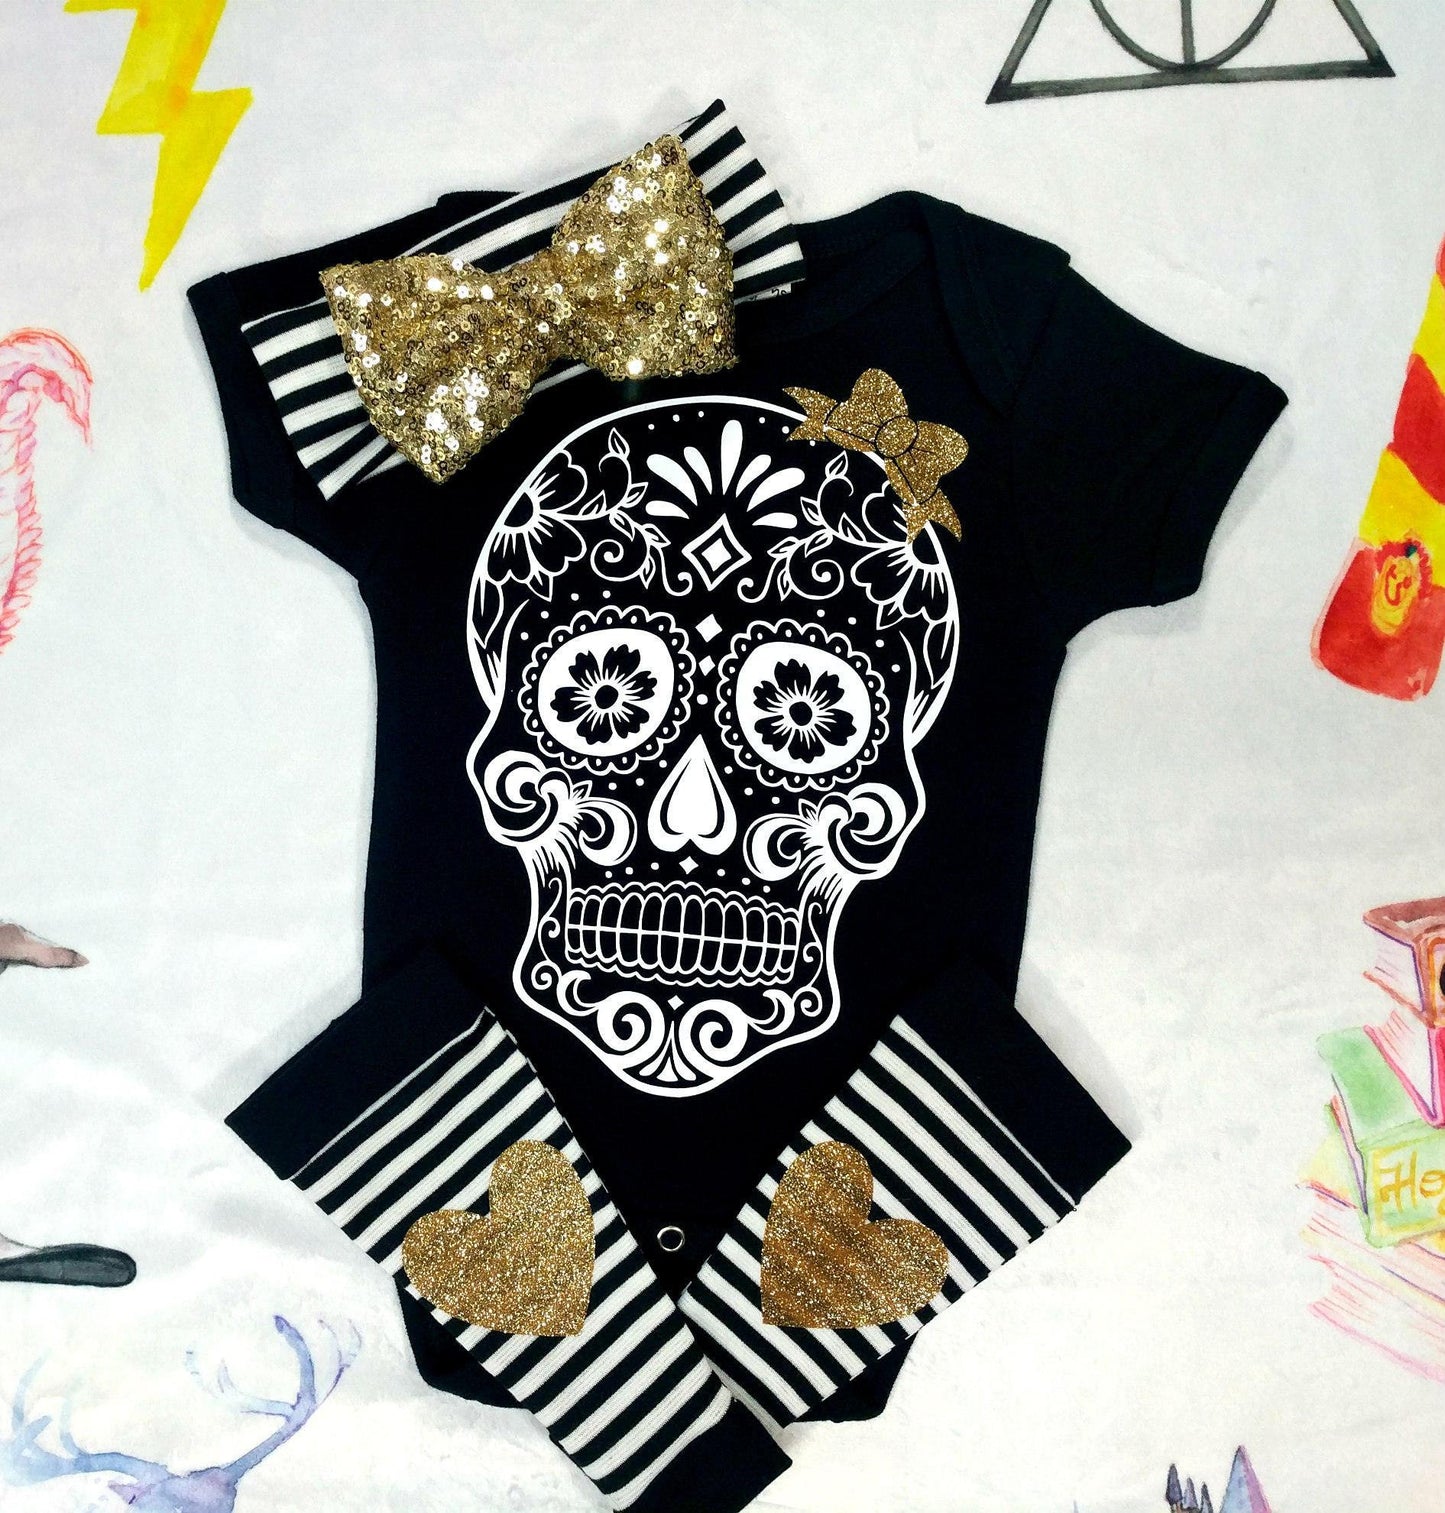 Sugar Skull Baby Outfit,Skull Bodysuit + Baby Leg Warmers with Heart Knee Patches & Gold Sequin Bow Band,Goth Baby